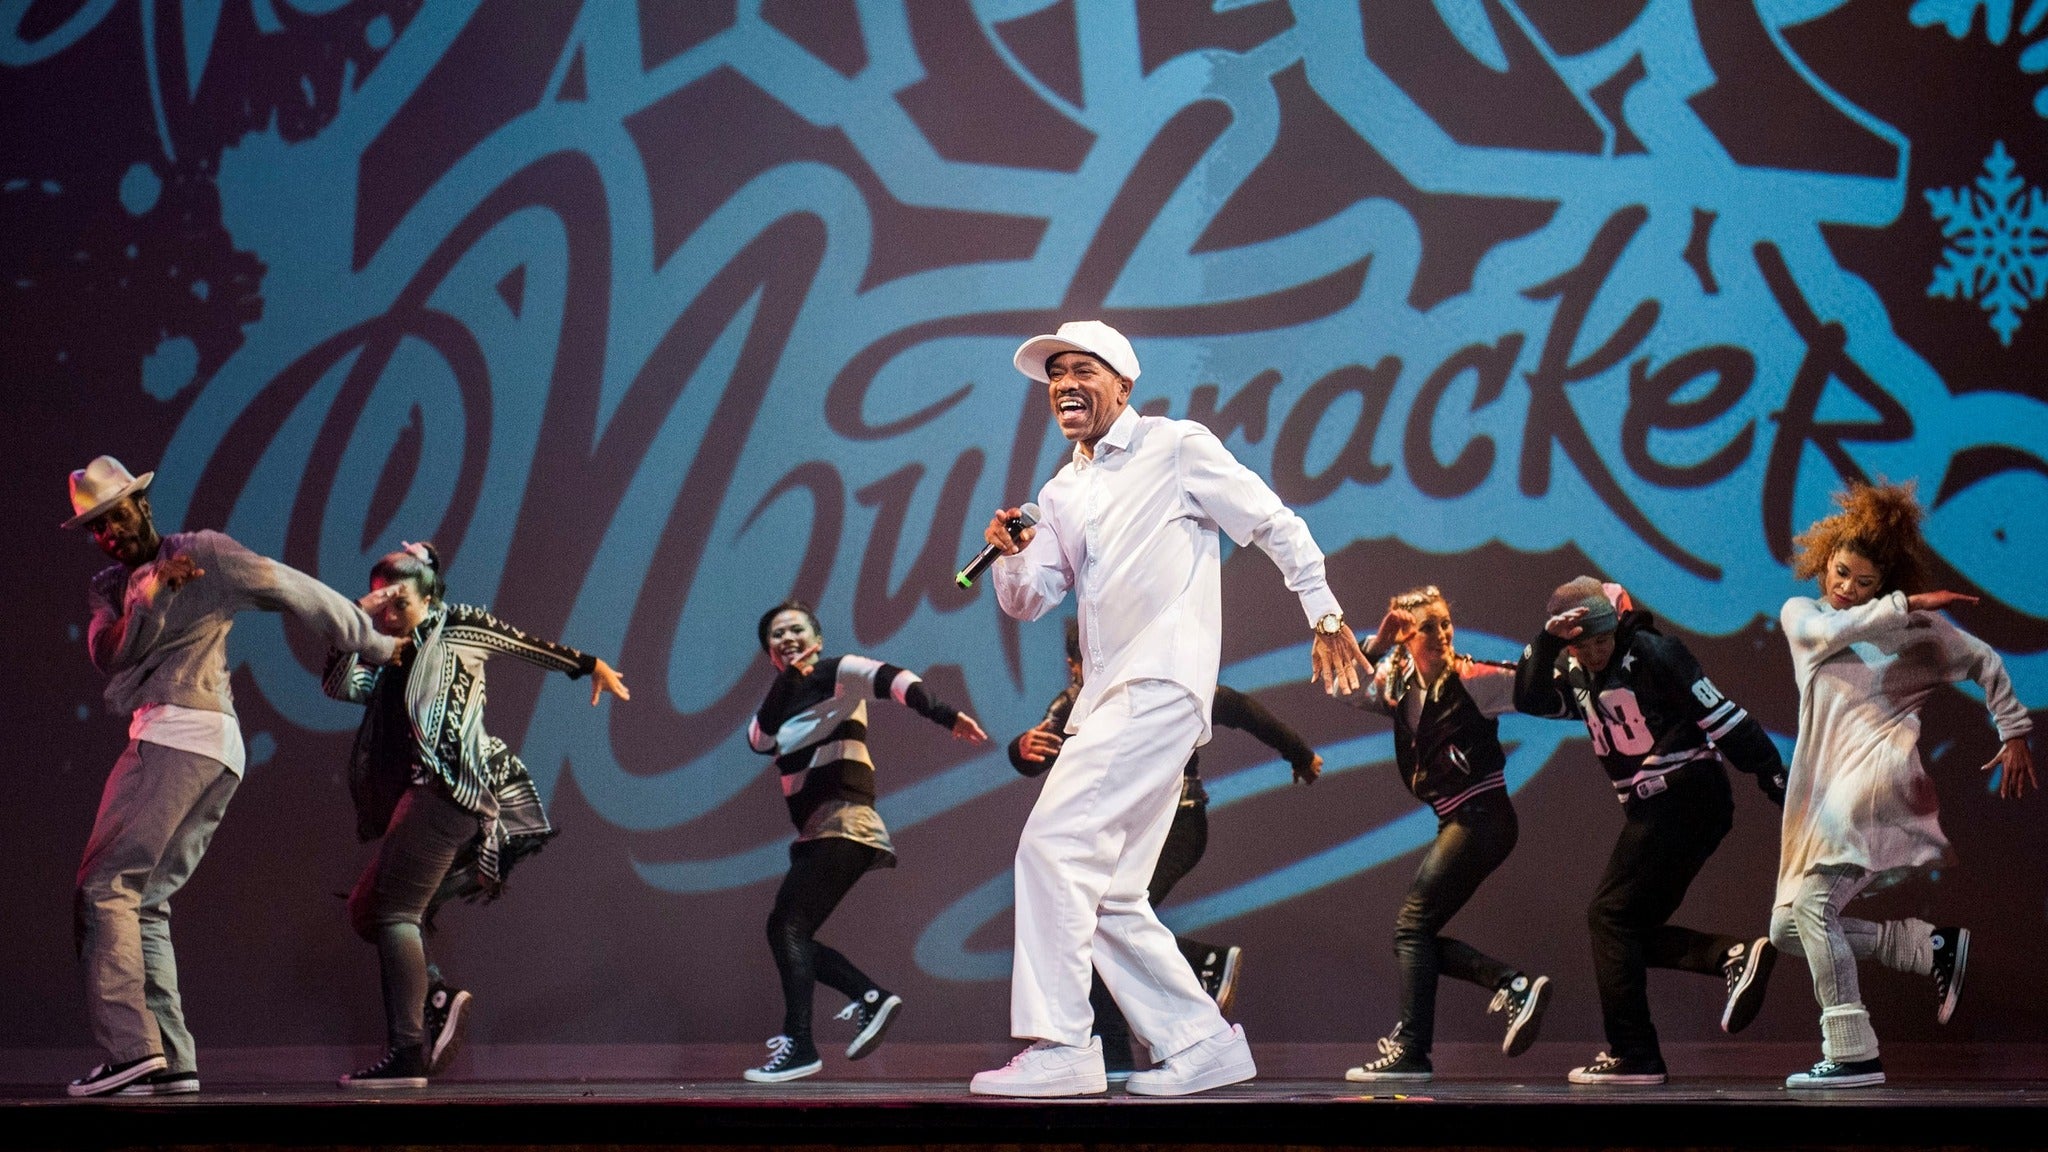 Image used with permission from Ticketmaster | Hip Hop Nutcracker tickets